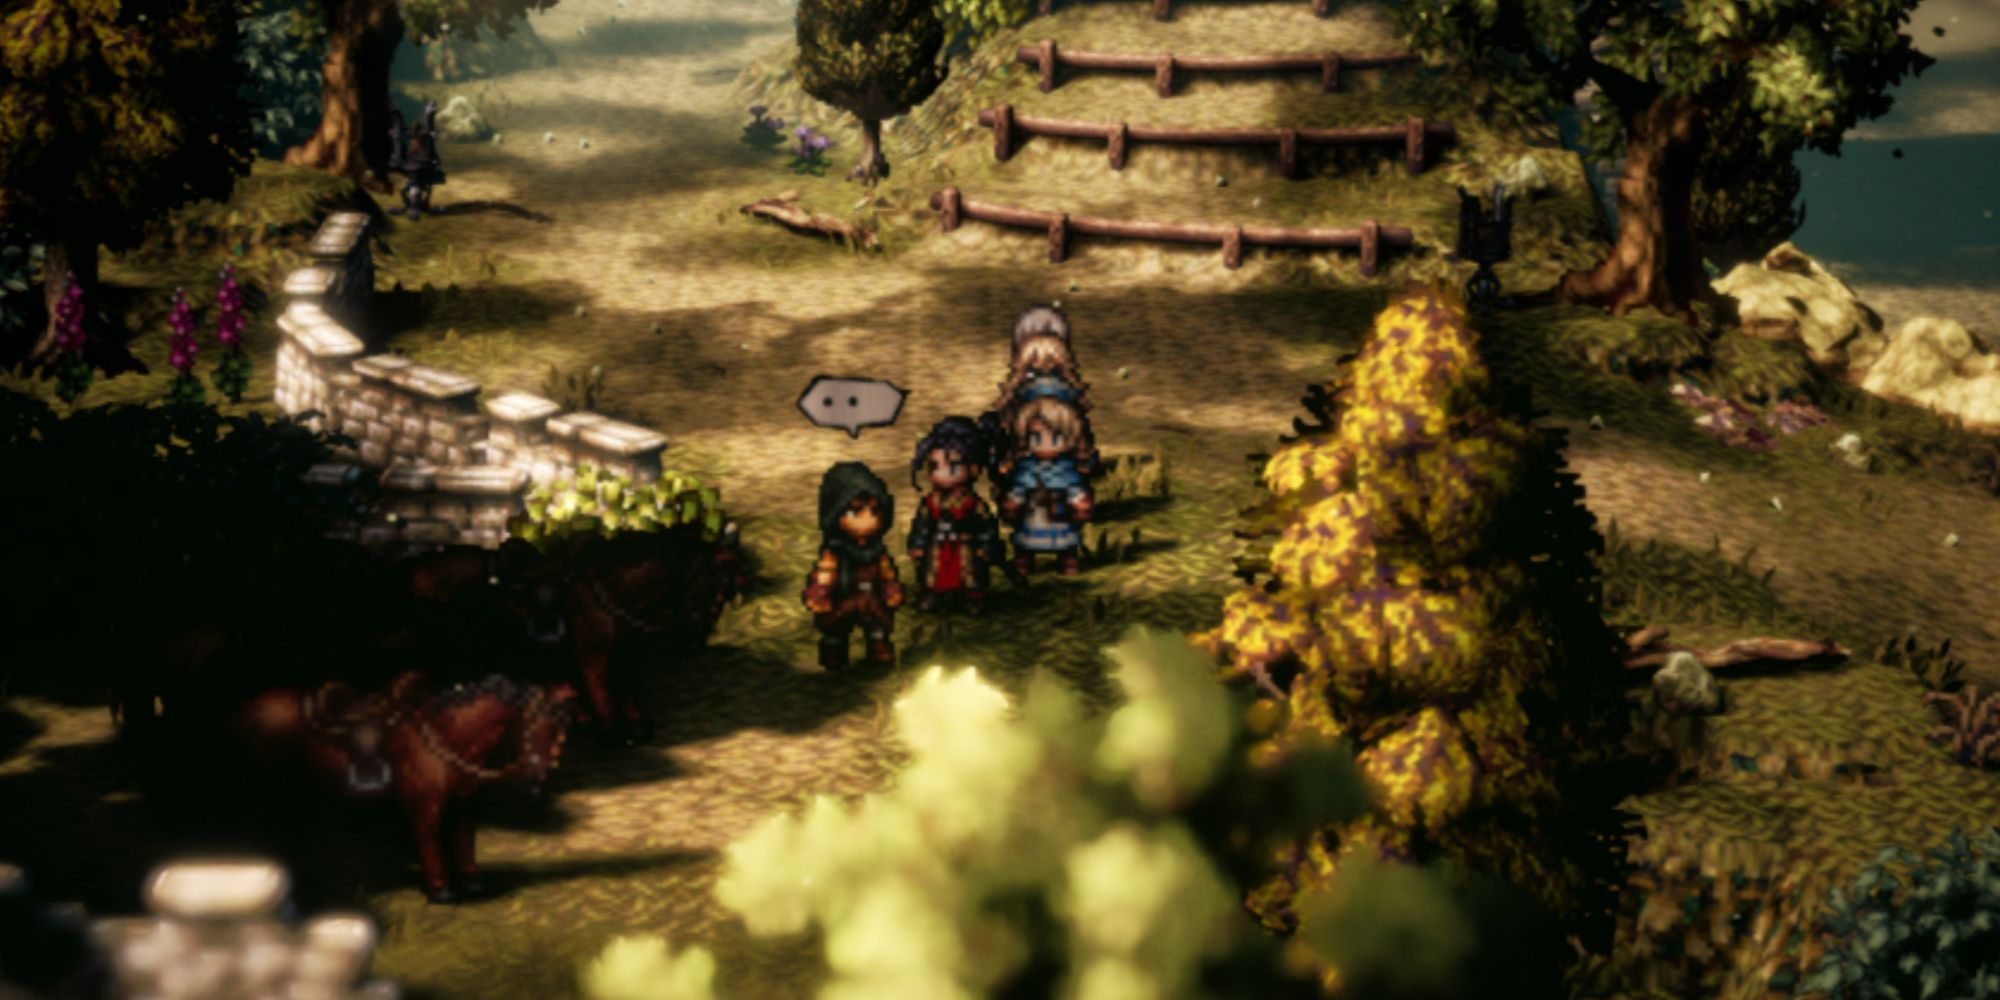 Octopath Traveler 2, Hikari confronting the Man with Horses at the bottom of the Eastern Wellgrove Trail